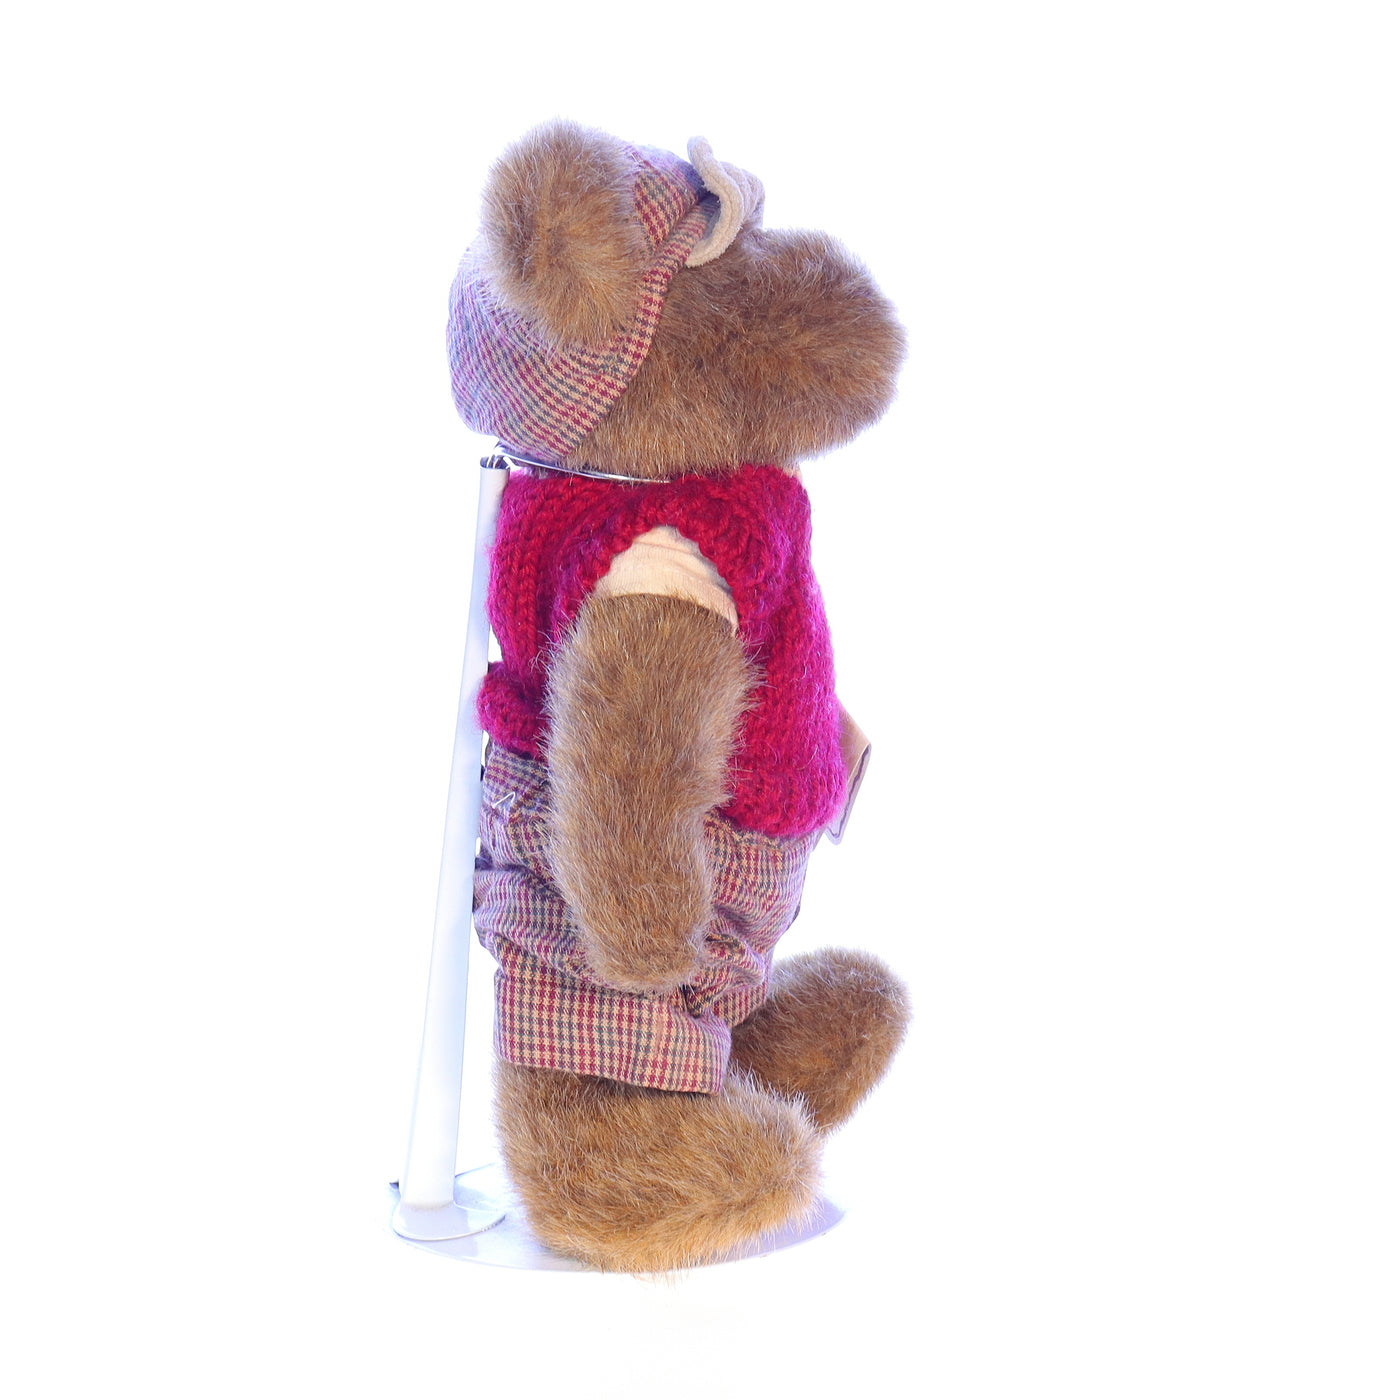 Boyds_Bears_and_Friends_918339_Putter_T_Parfore_TJs_Best_Dressed_Stuffed_Animal_1988 Right View